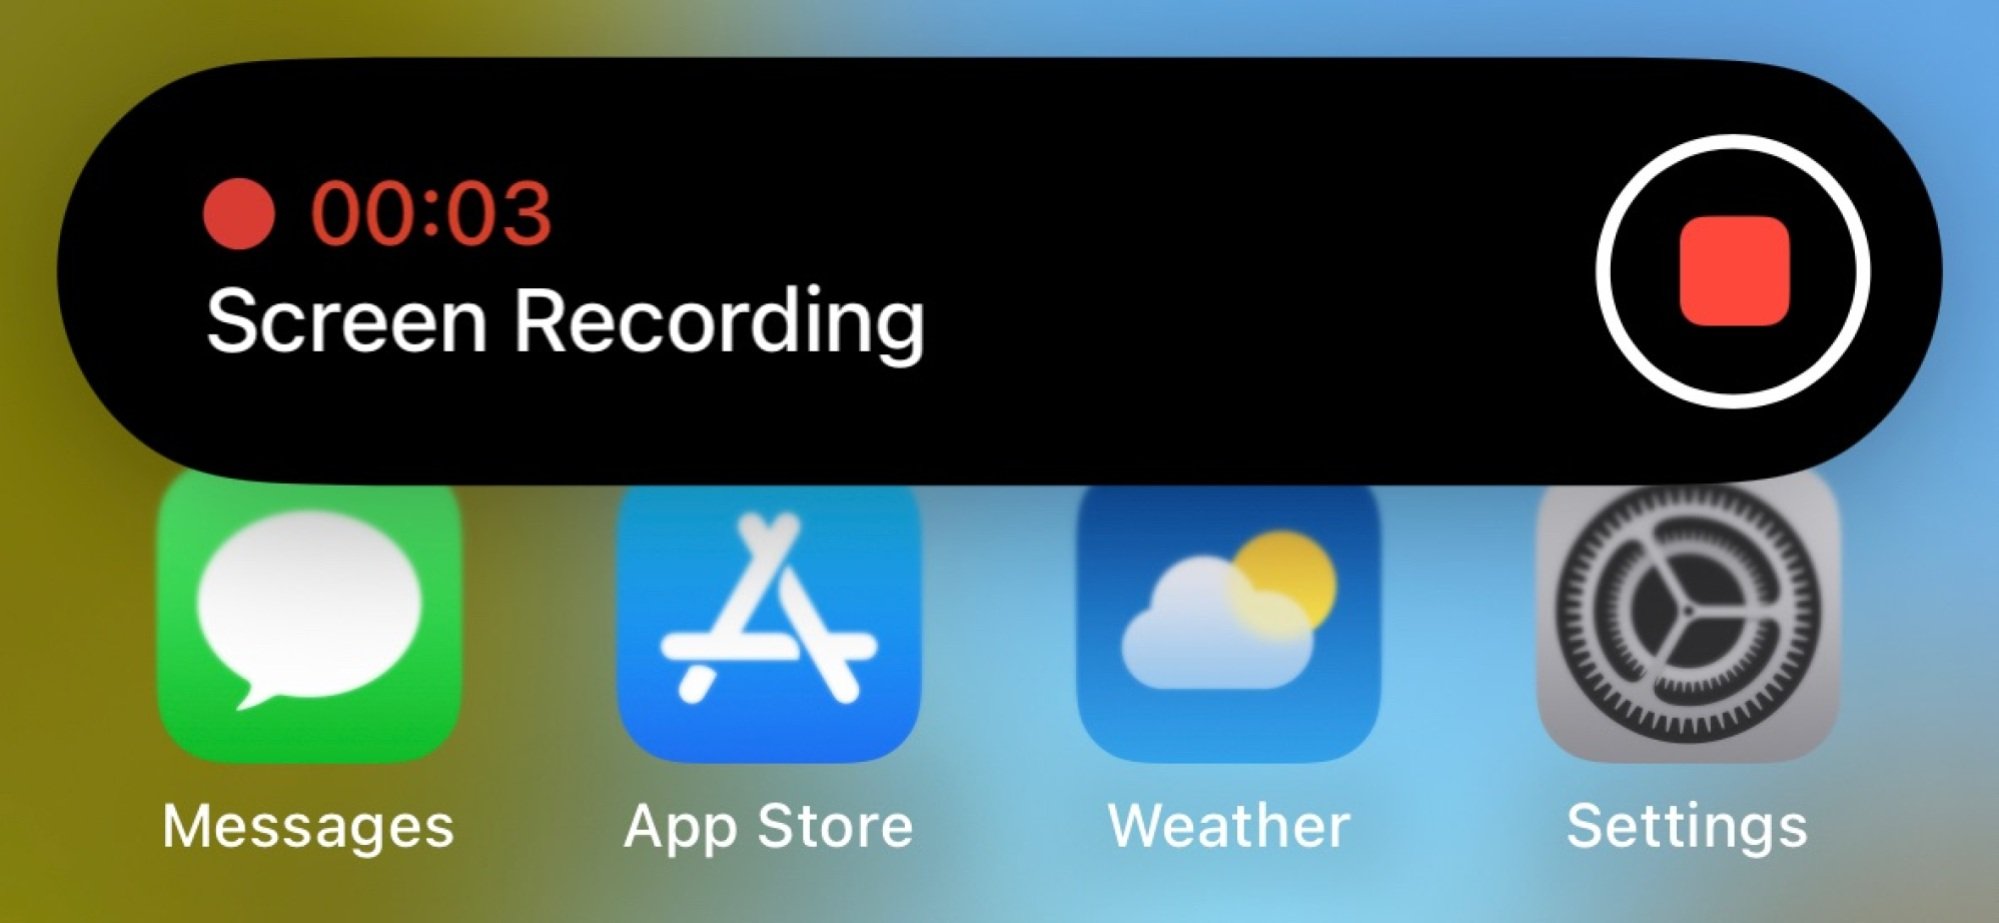 iPhone showing screen recording button